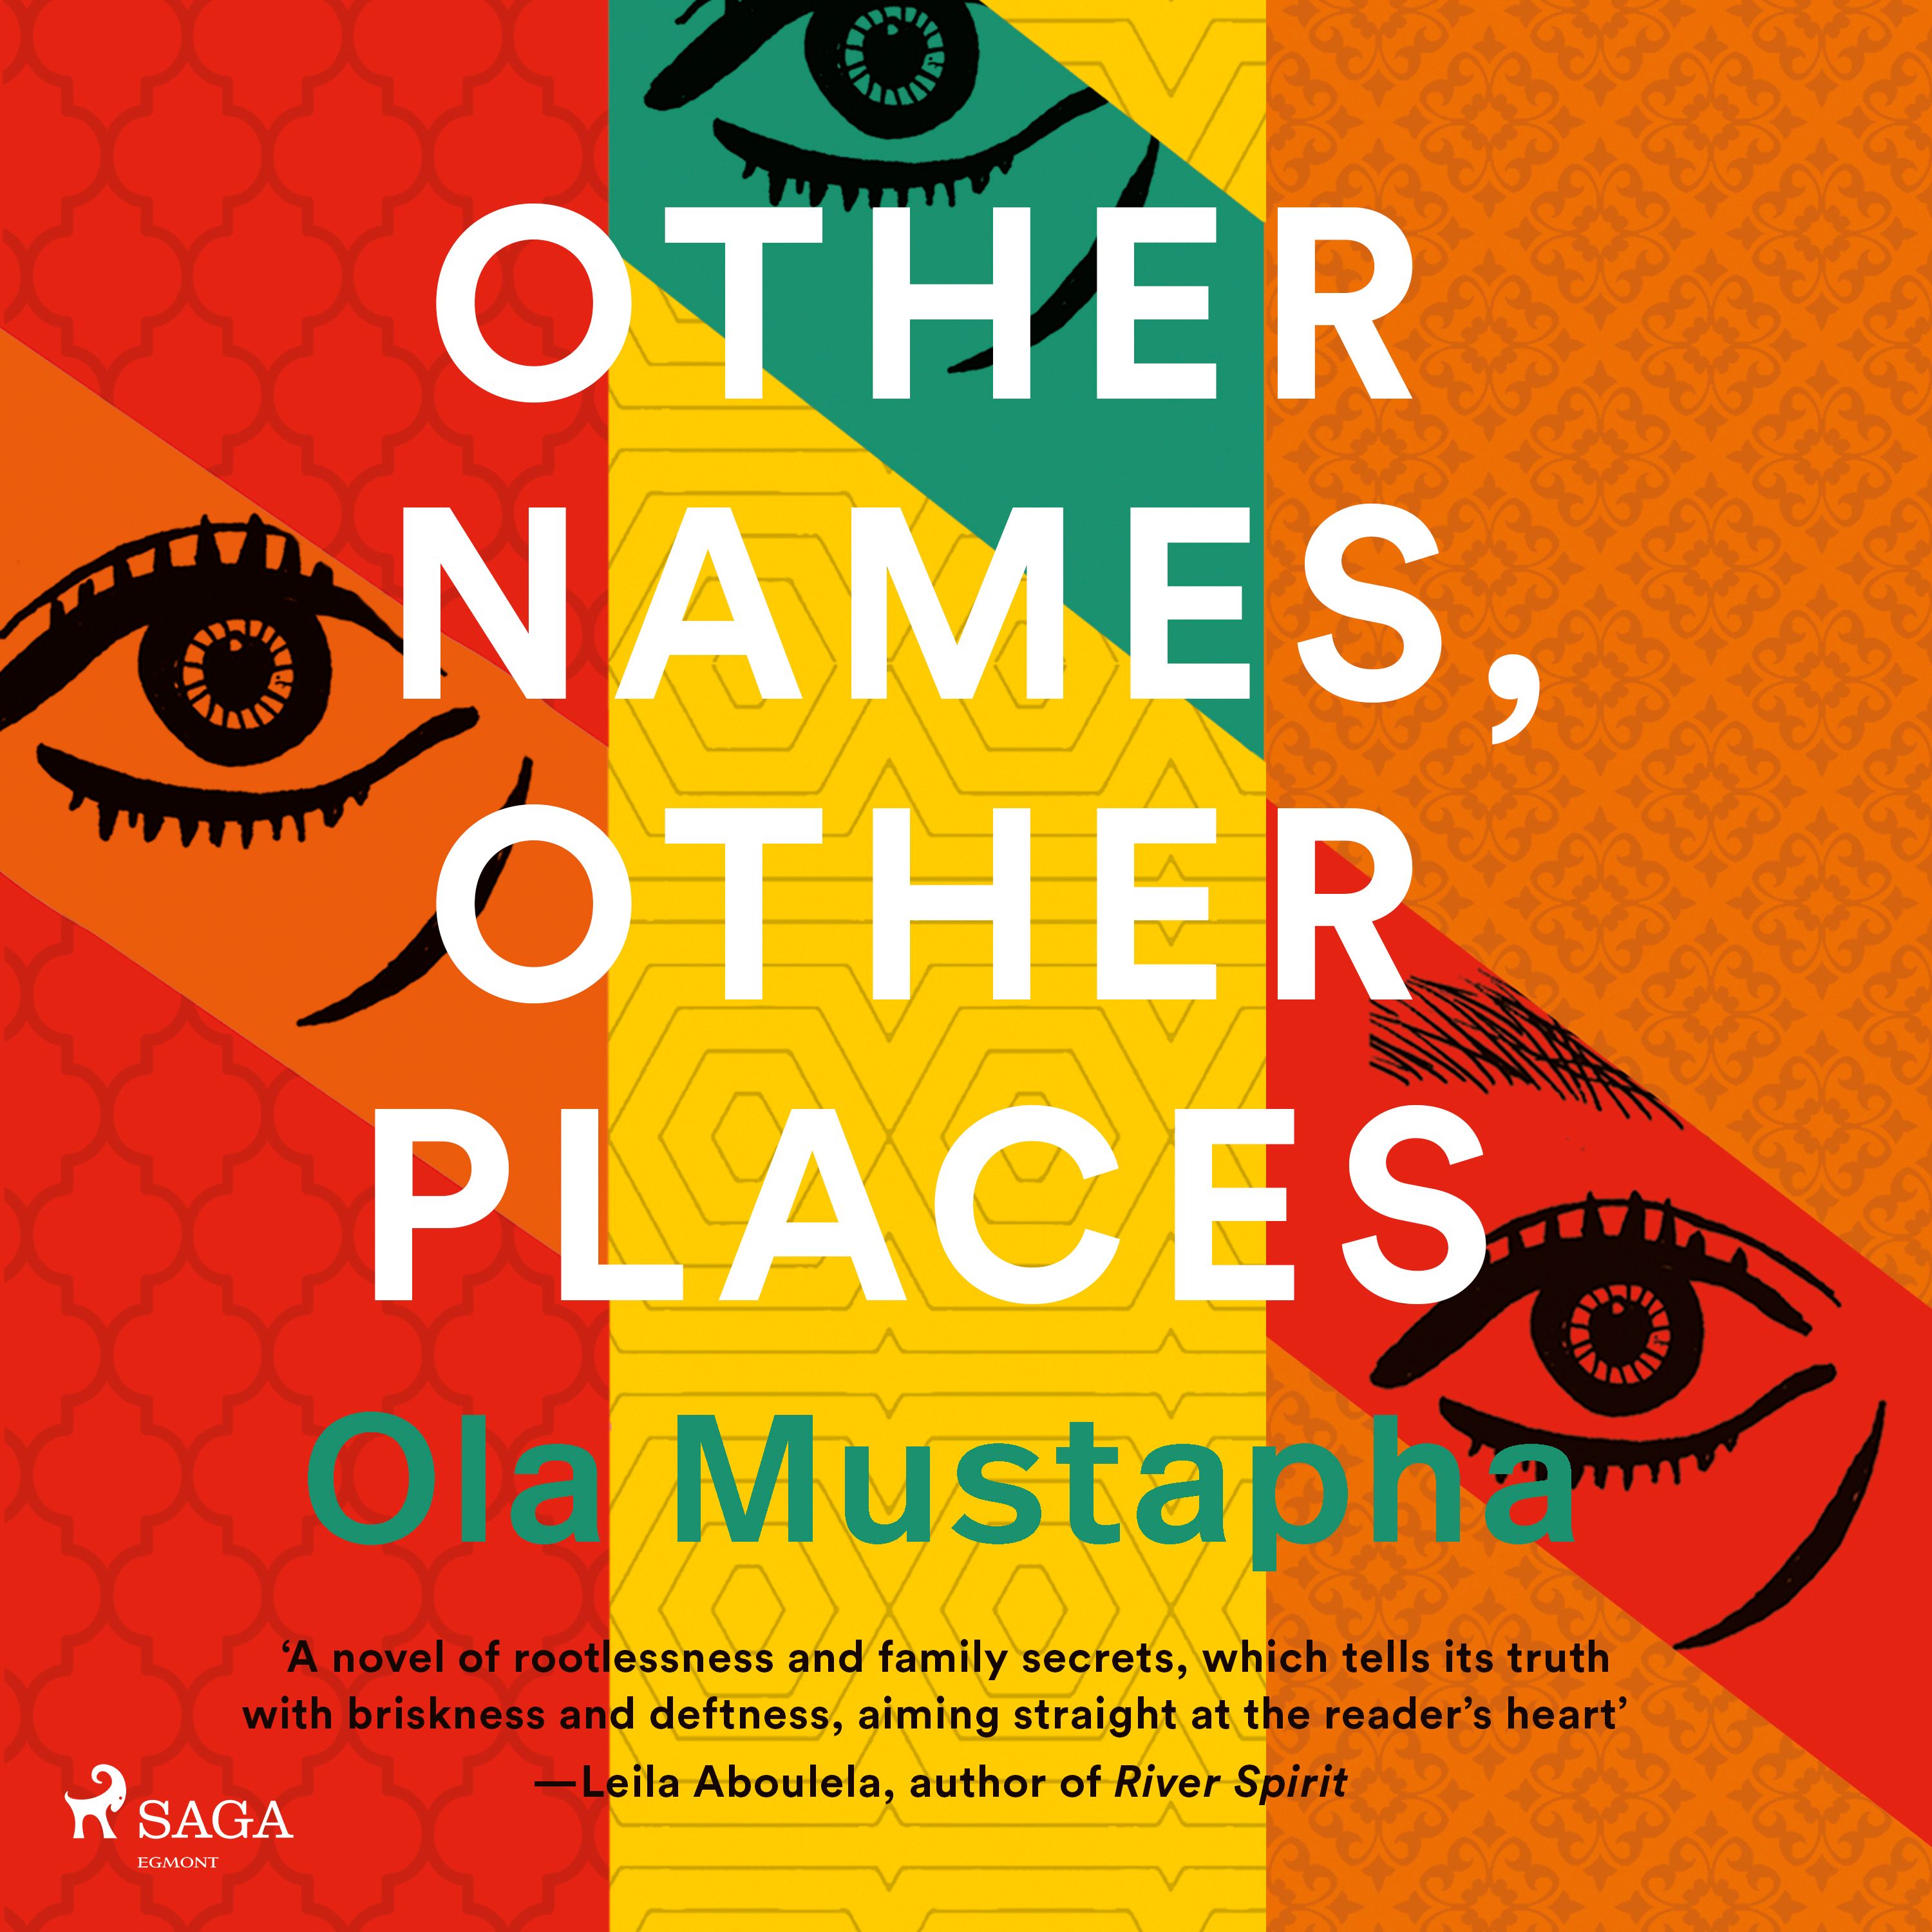 Other Names, Other Places, audiobook by Ola Mustapha